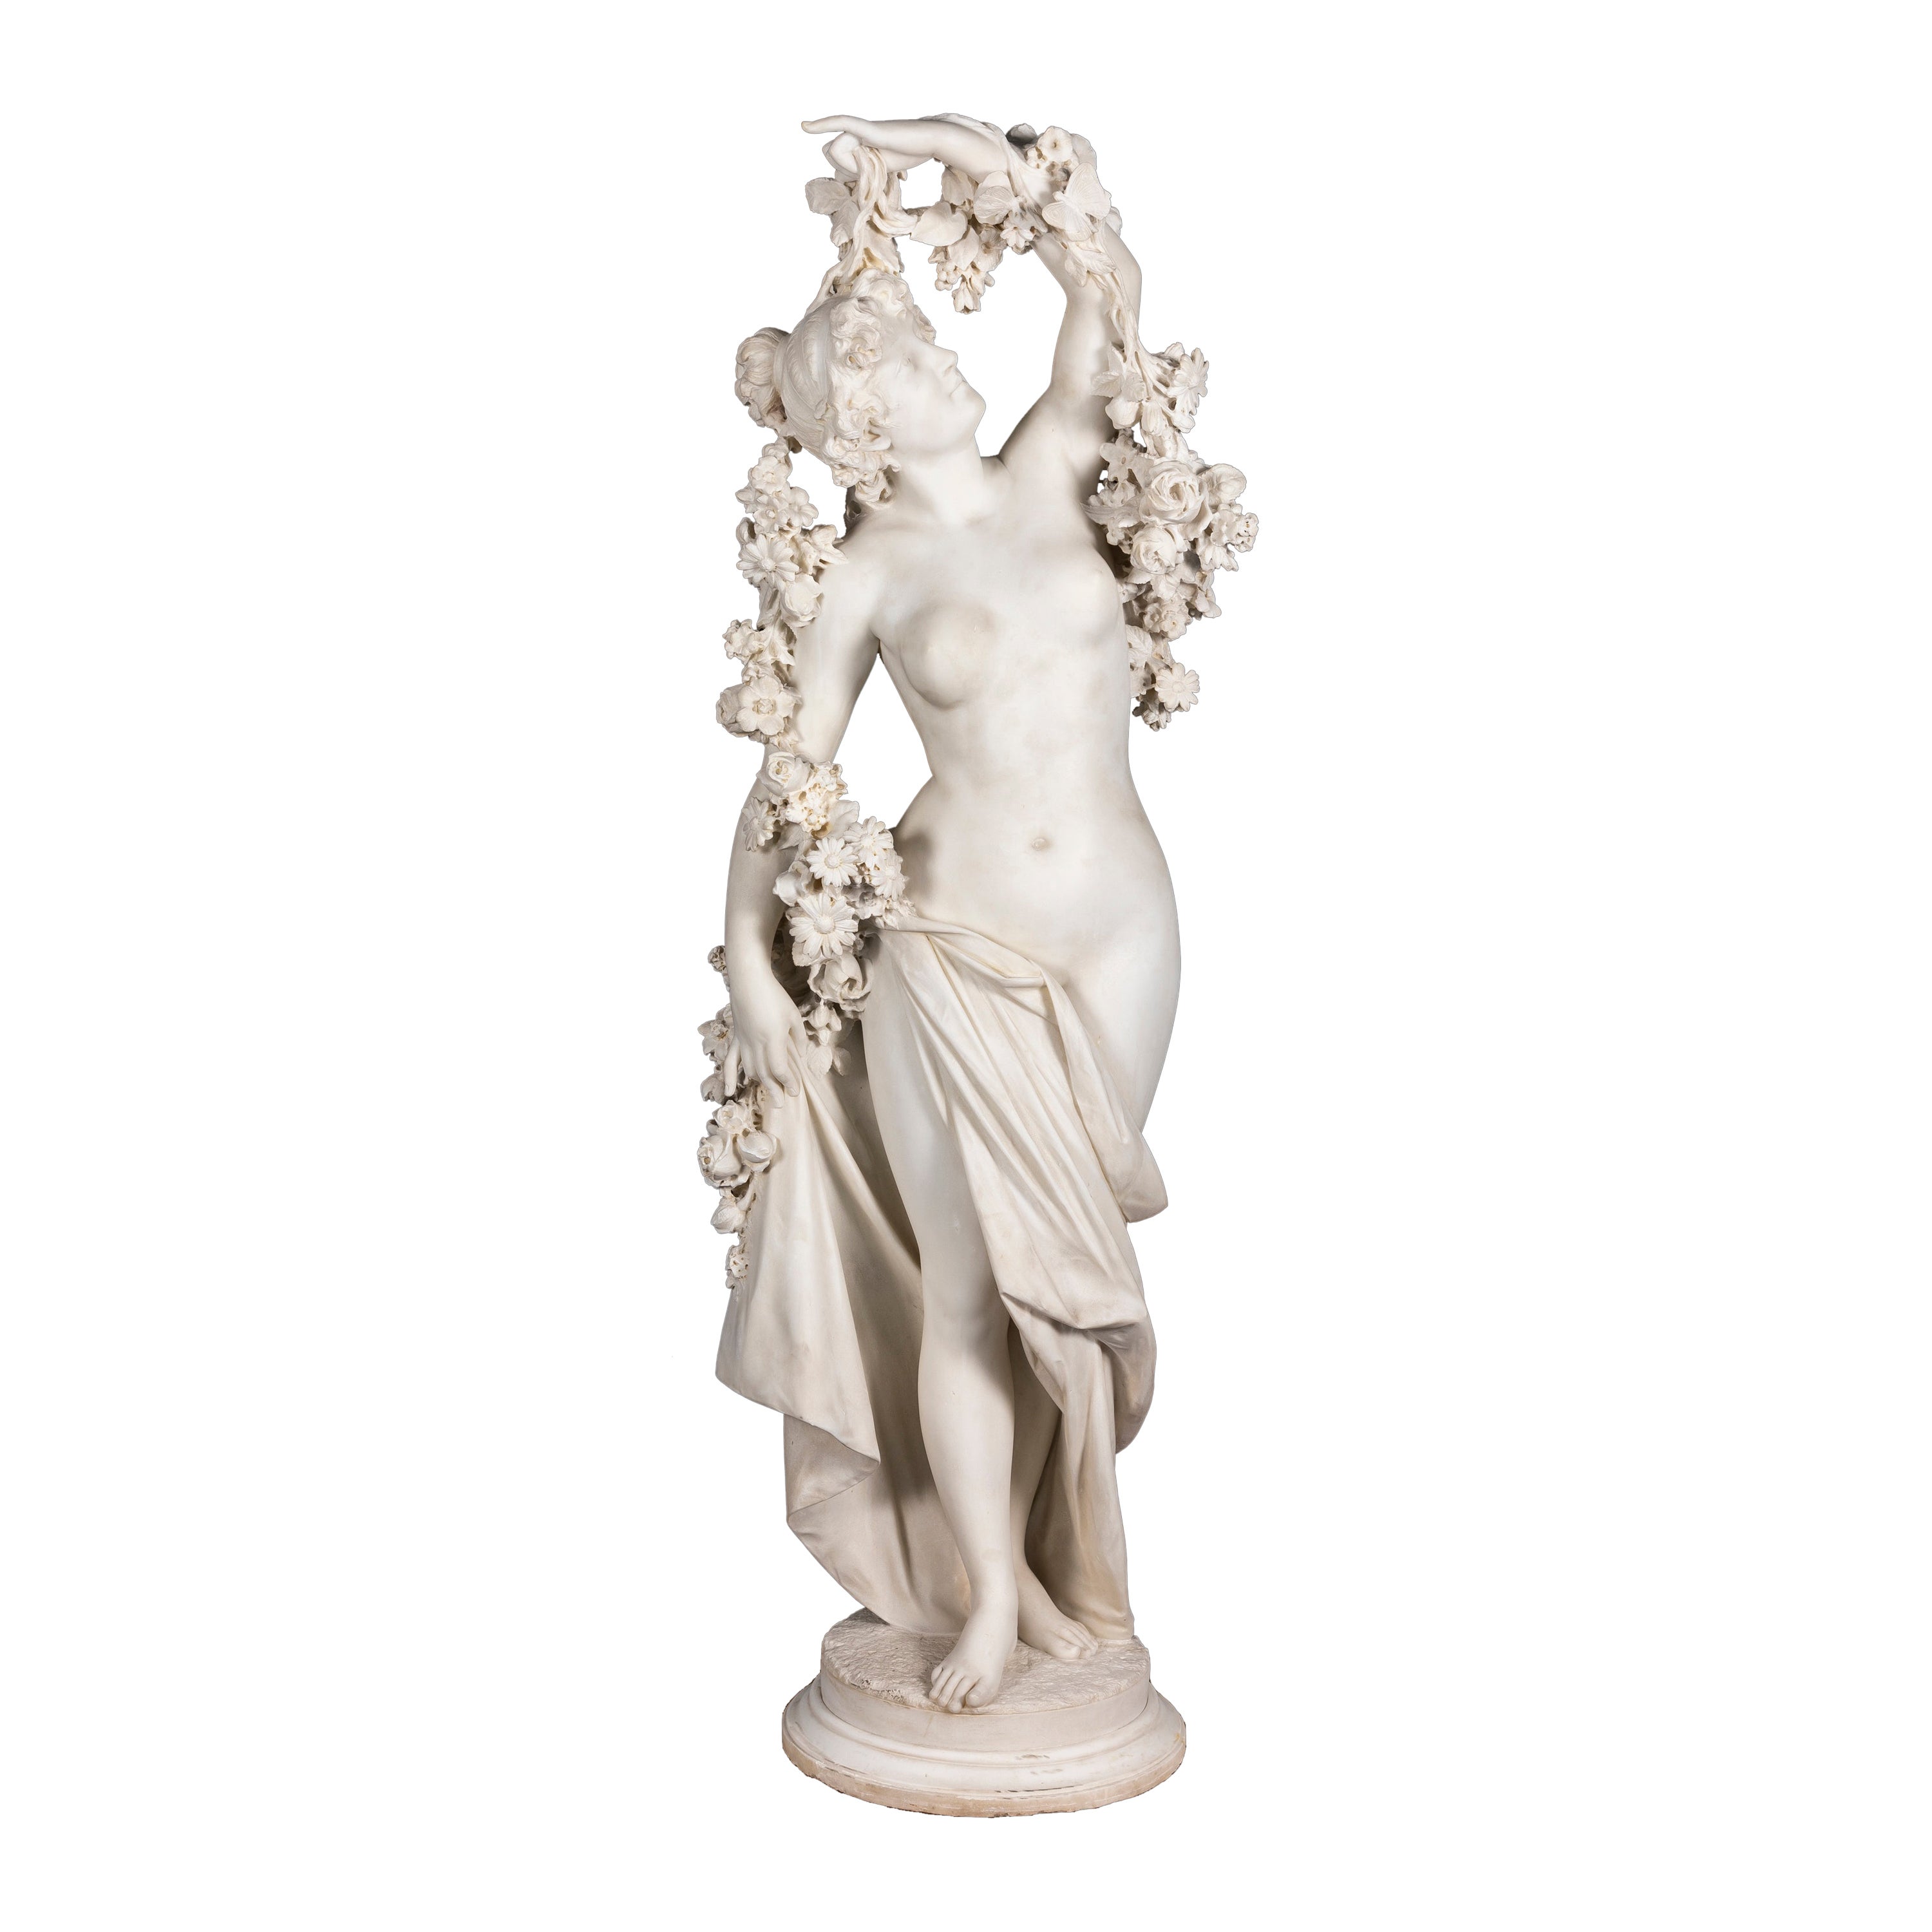 An Italian 19th C. Marble Sculpture of "Flora's Embrace", By Professore F. Galli For Sale